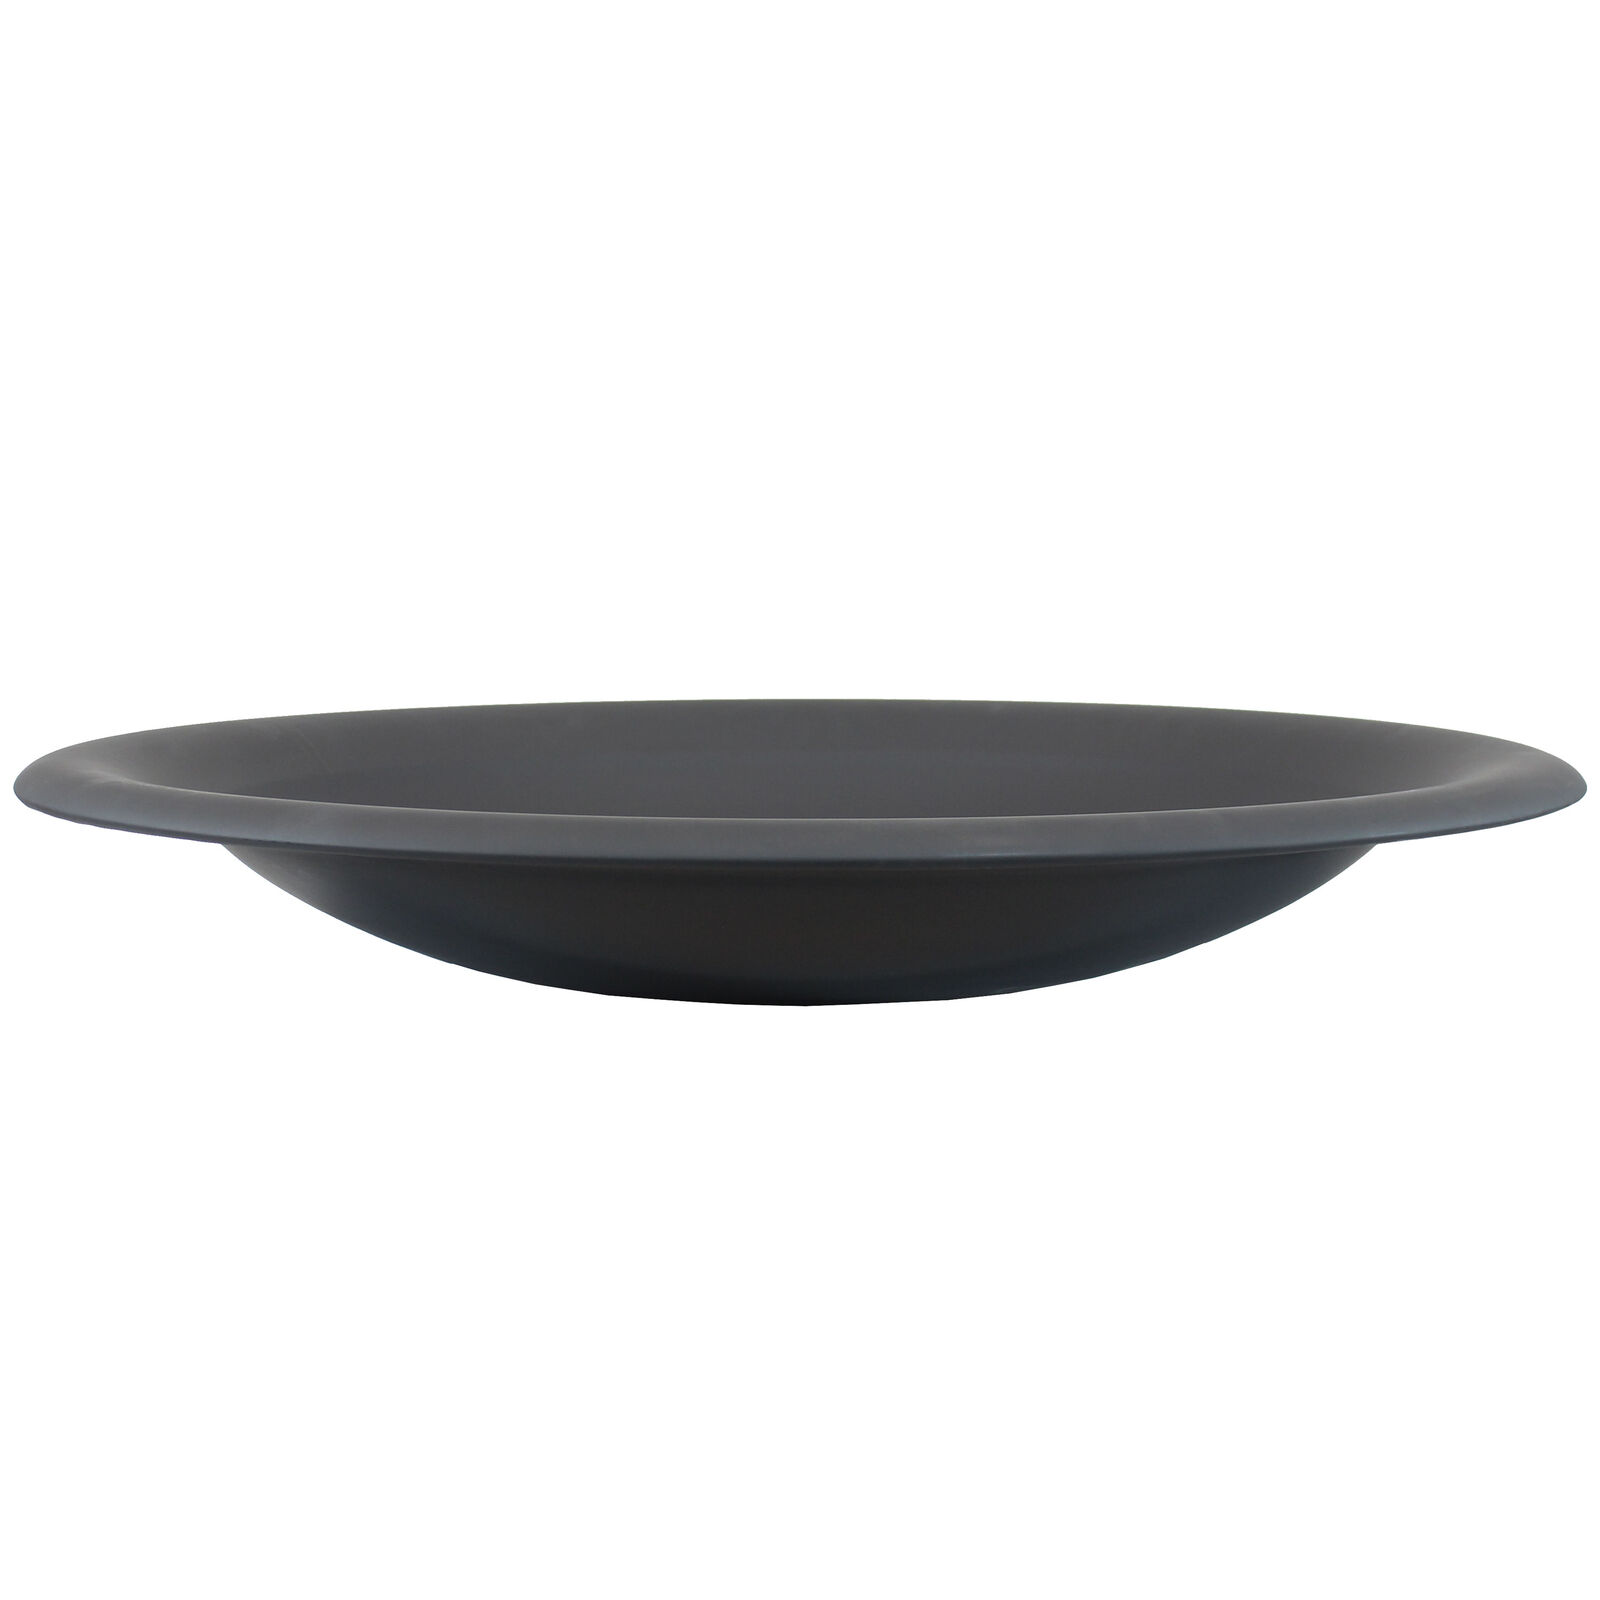 33 in Classic Elegance Steel Replacement Fire Pit Bowl - Black by Sunnydaze